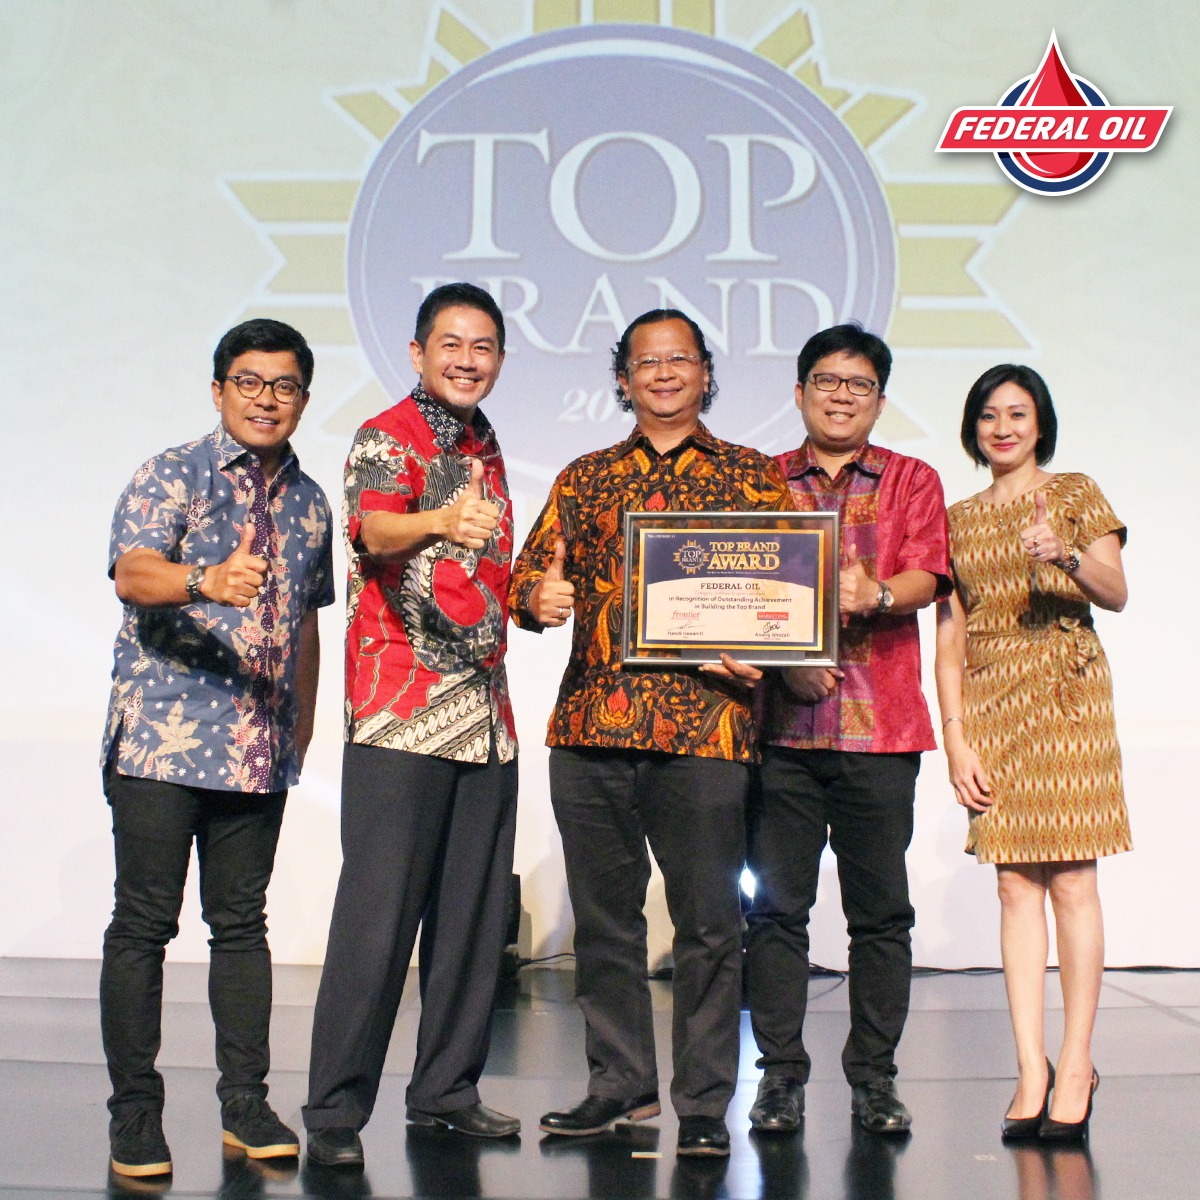 Federal Oil Receives Top Brand Award for the 5th Consecutive Years